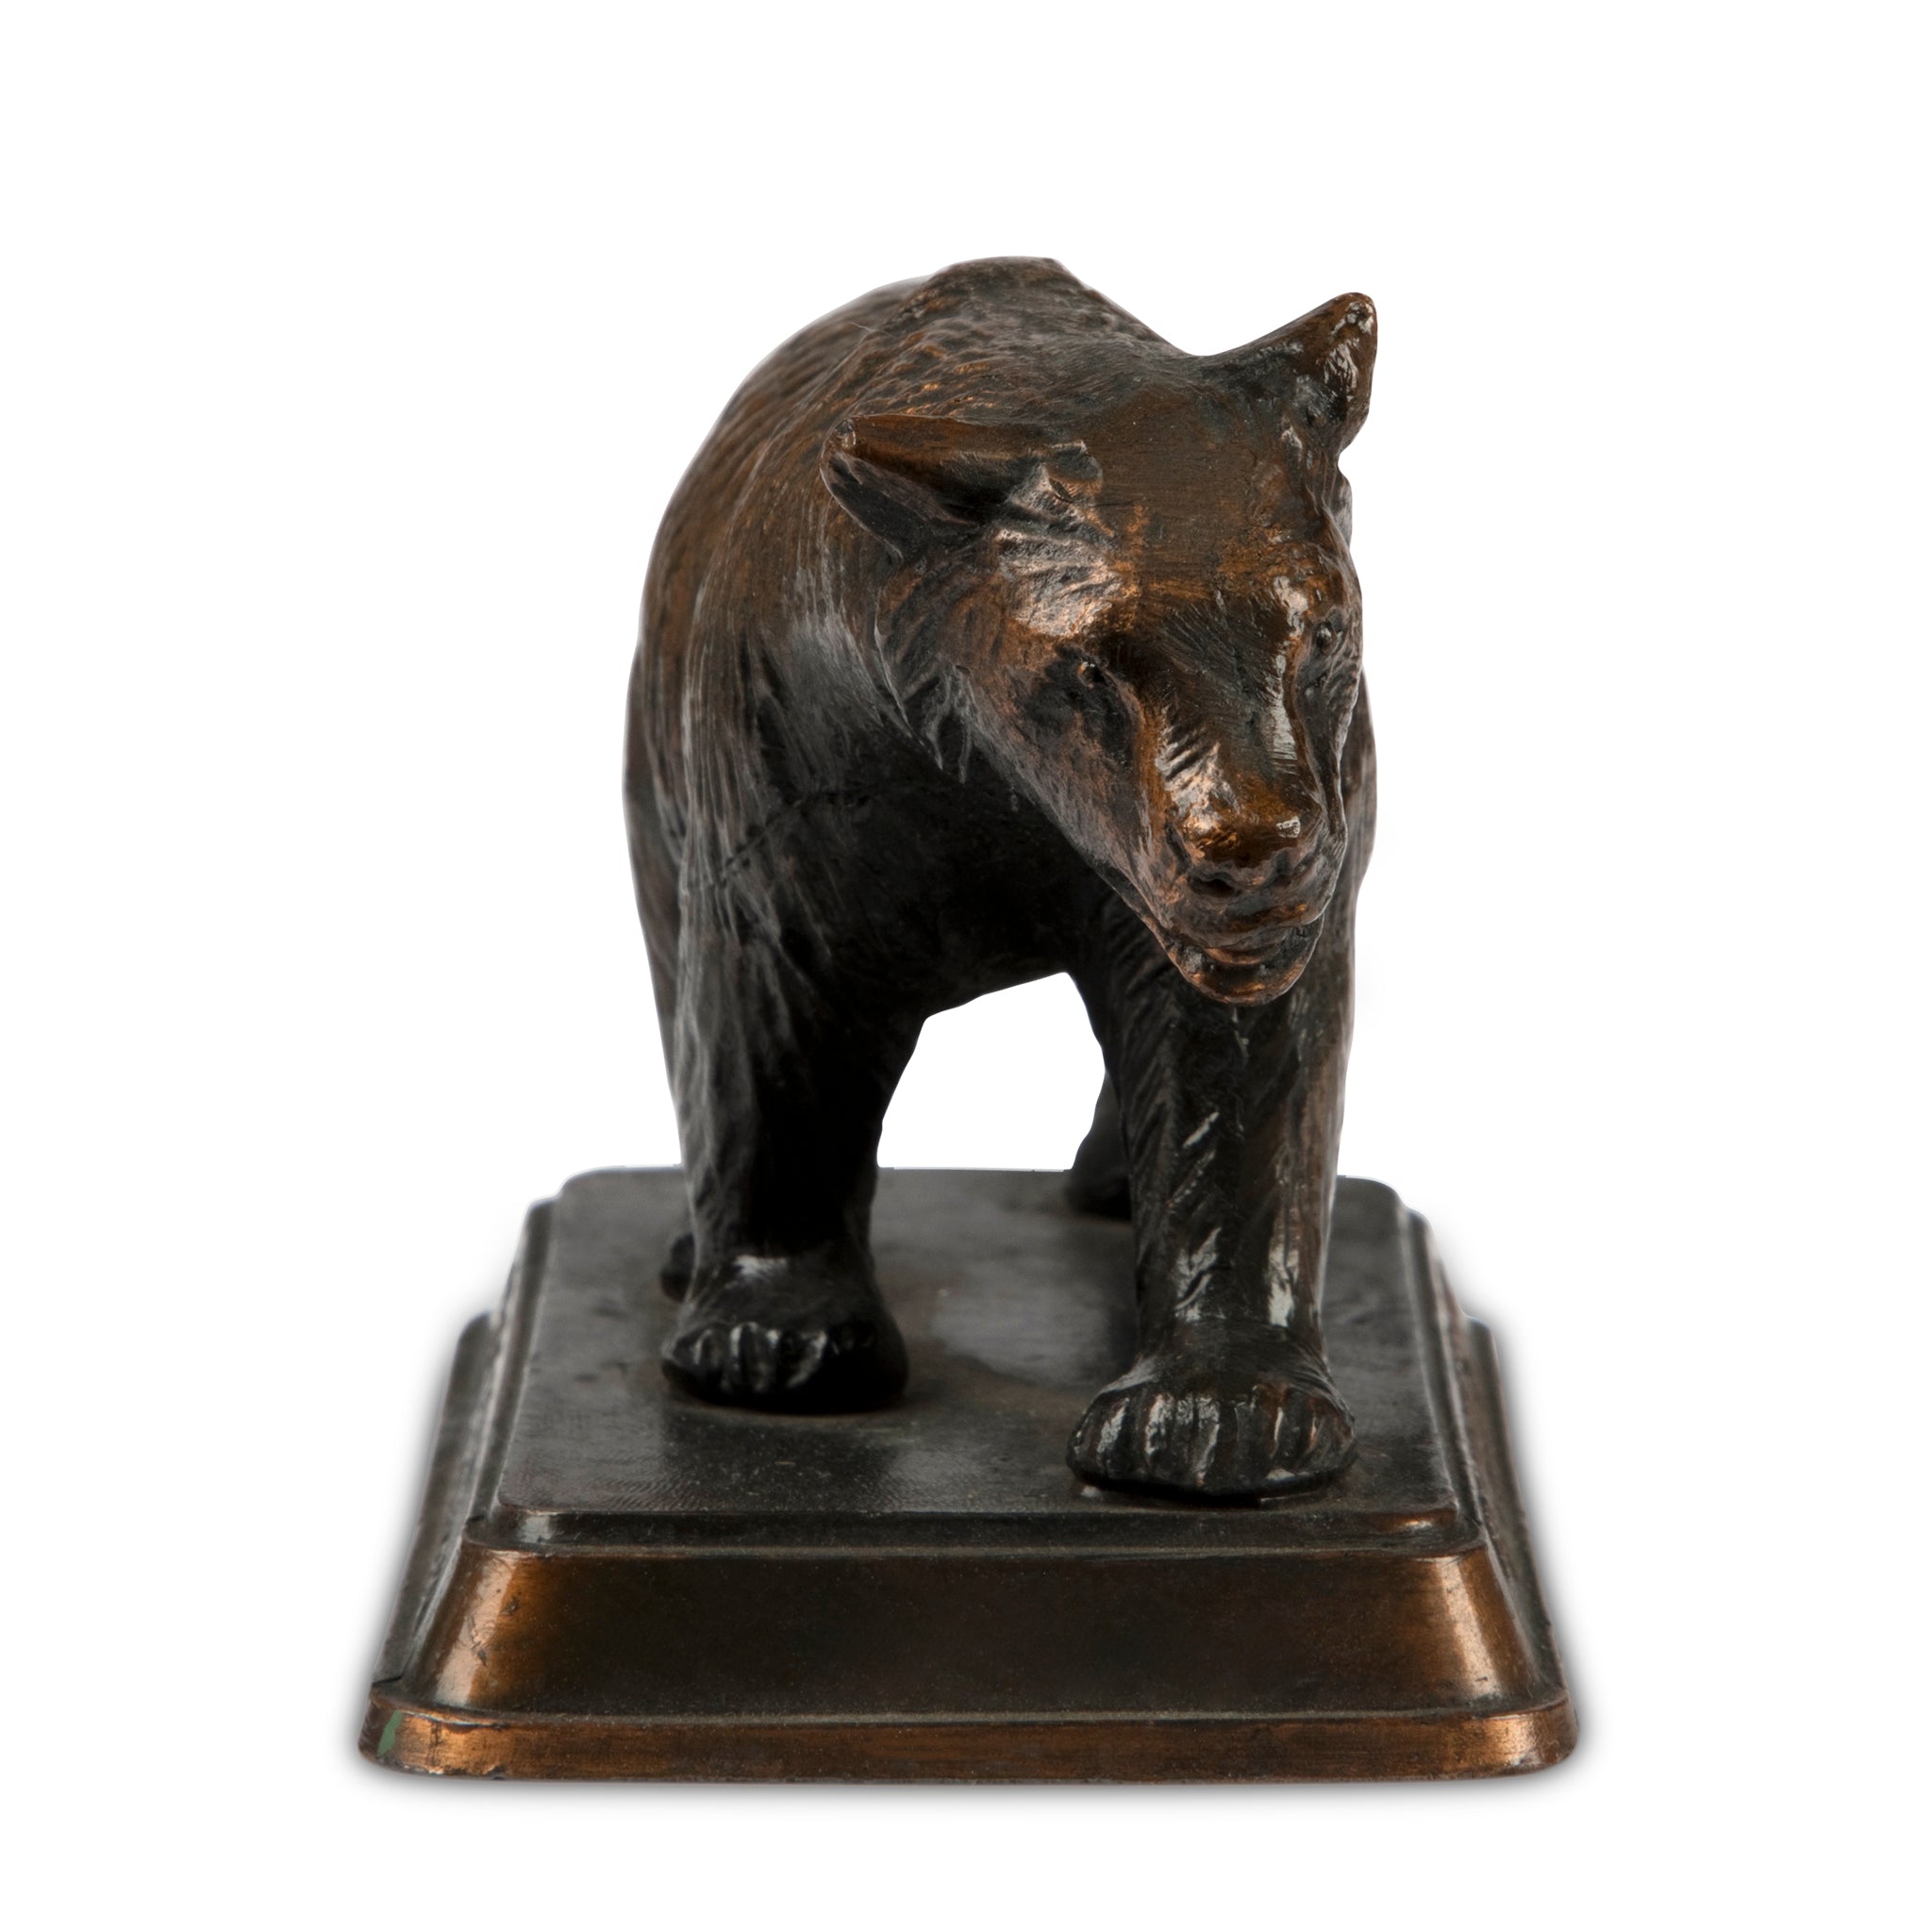 Vintage Grizzly Bear Paperweight